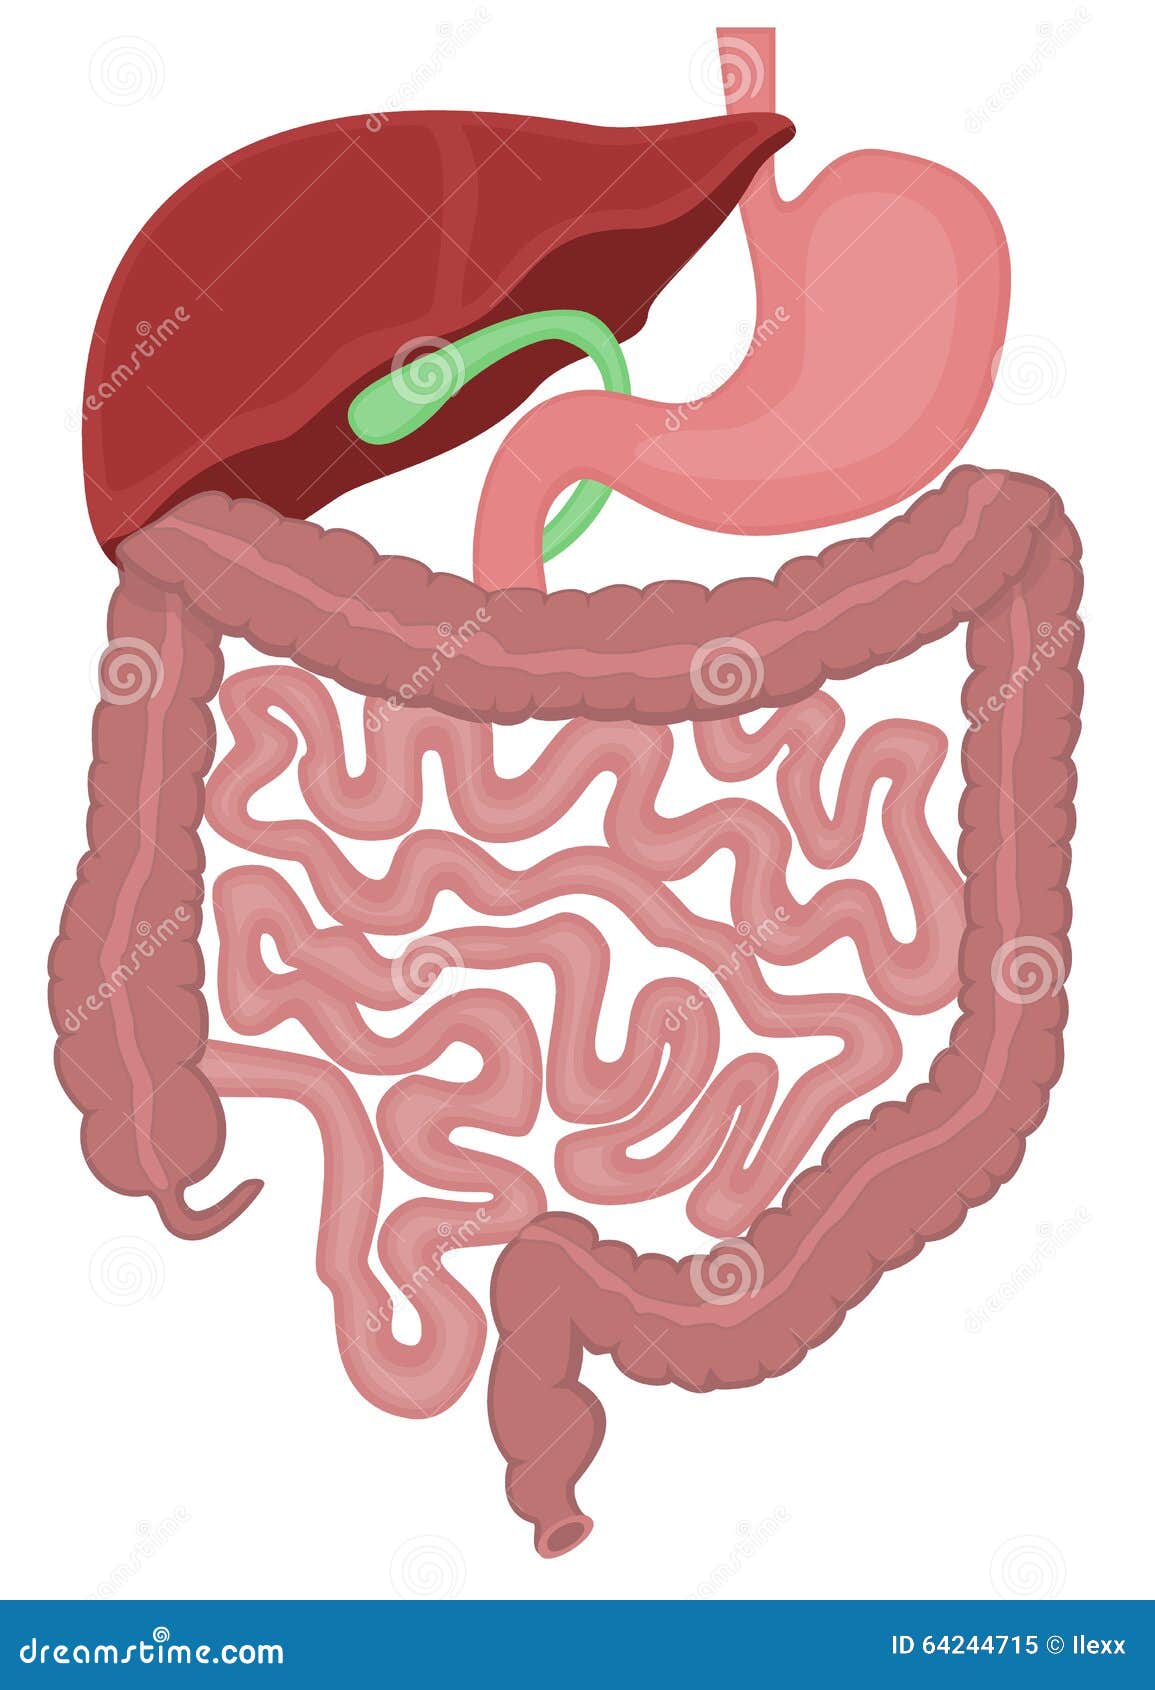 digestive tract of a human